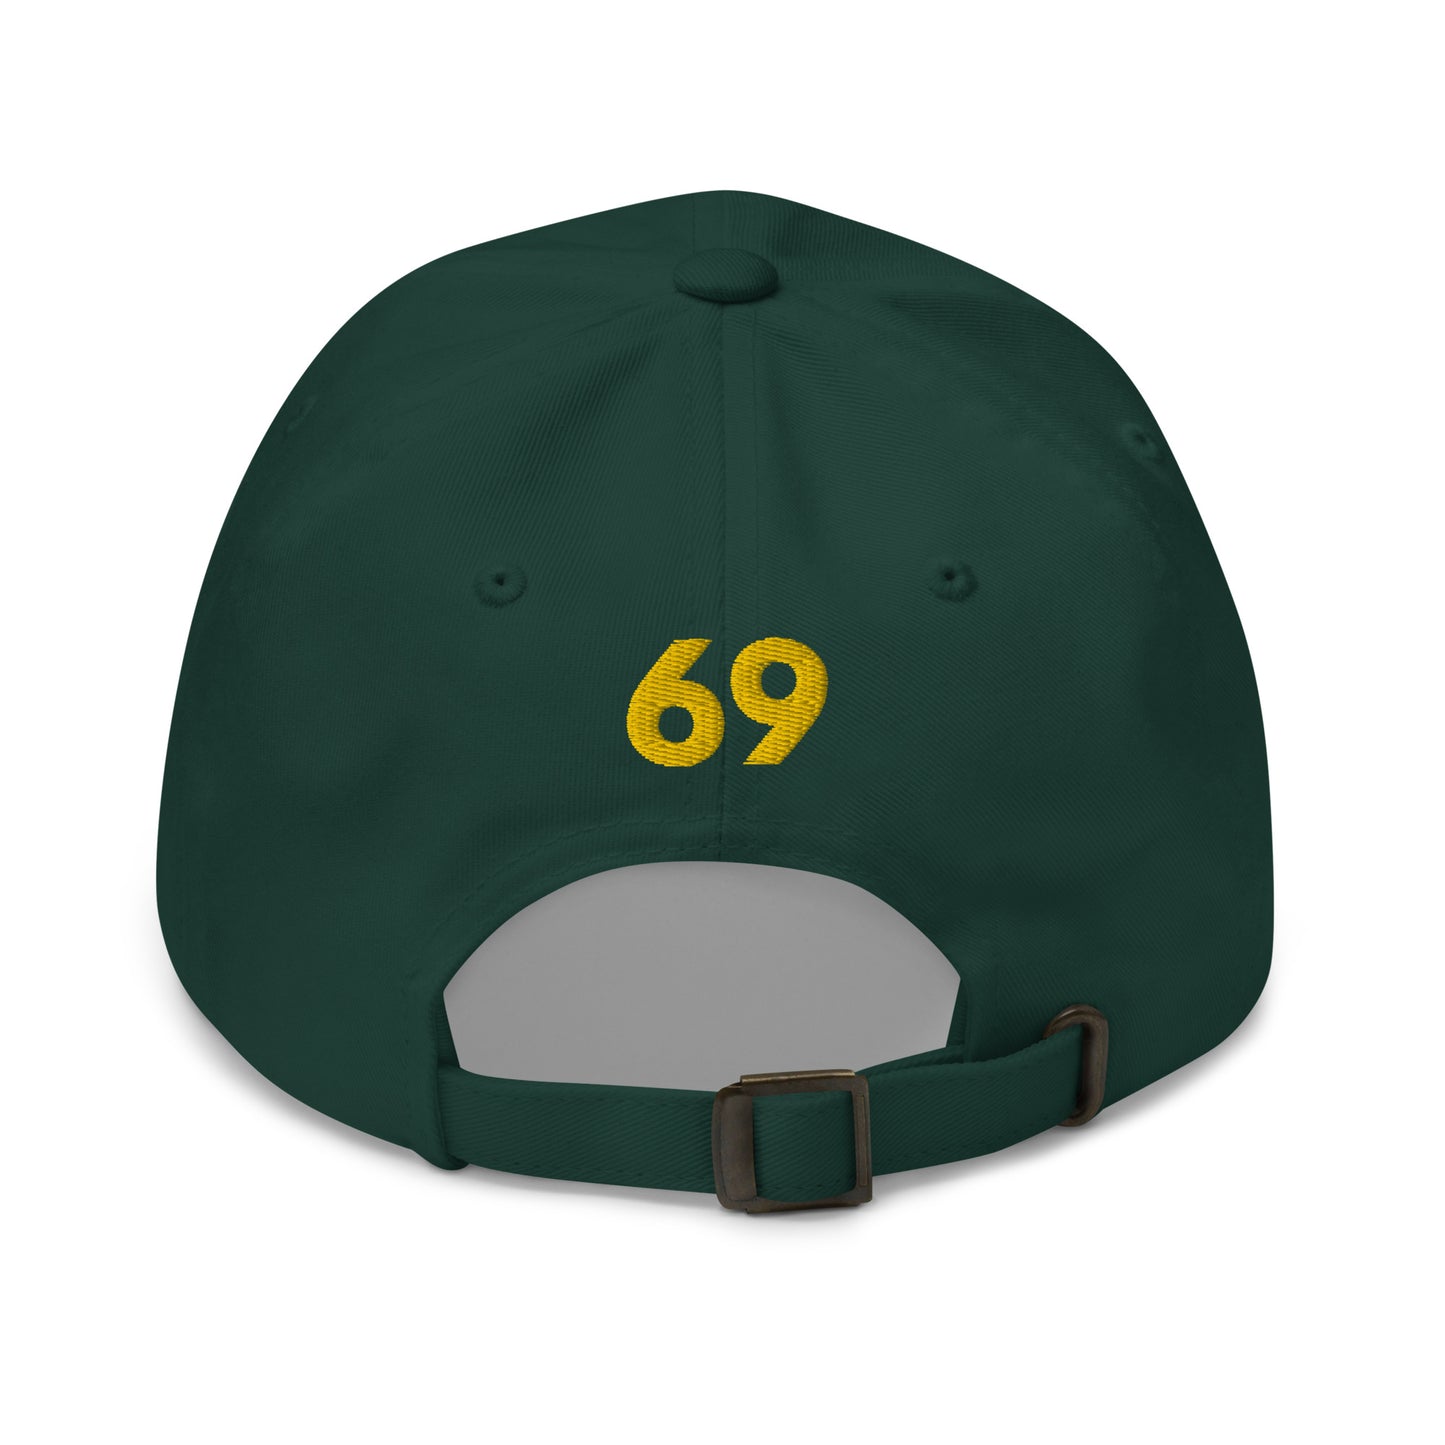 Titties Masters Edition Baseball Hat(Limited Quantities)